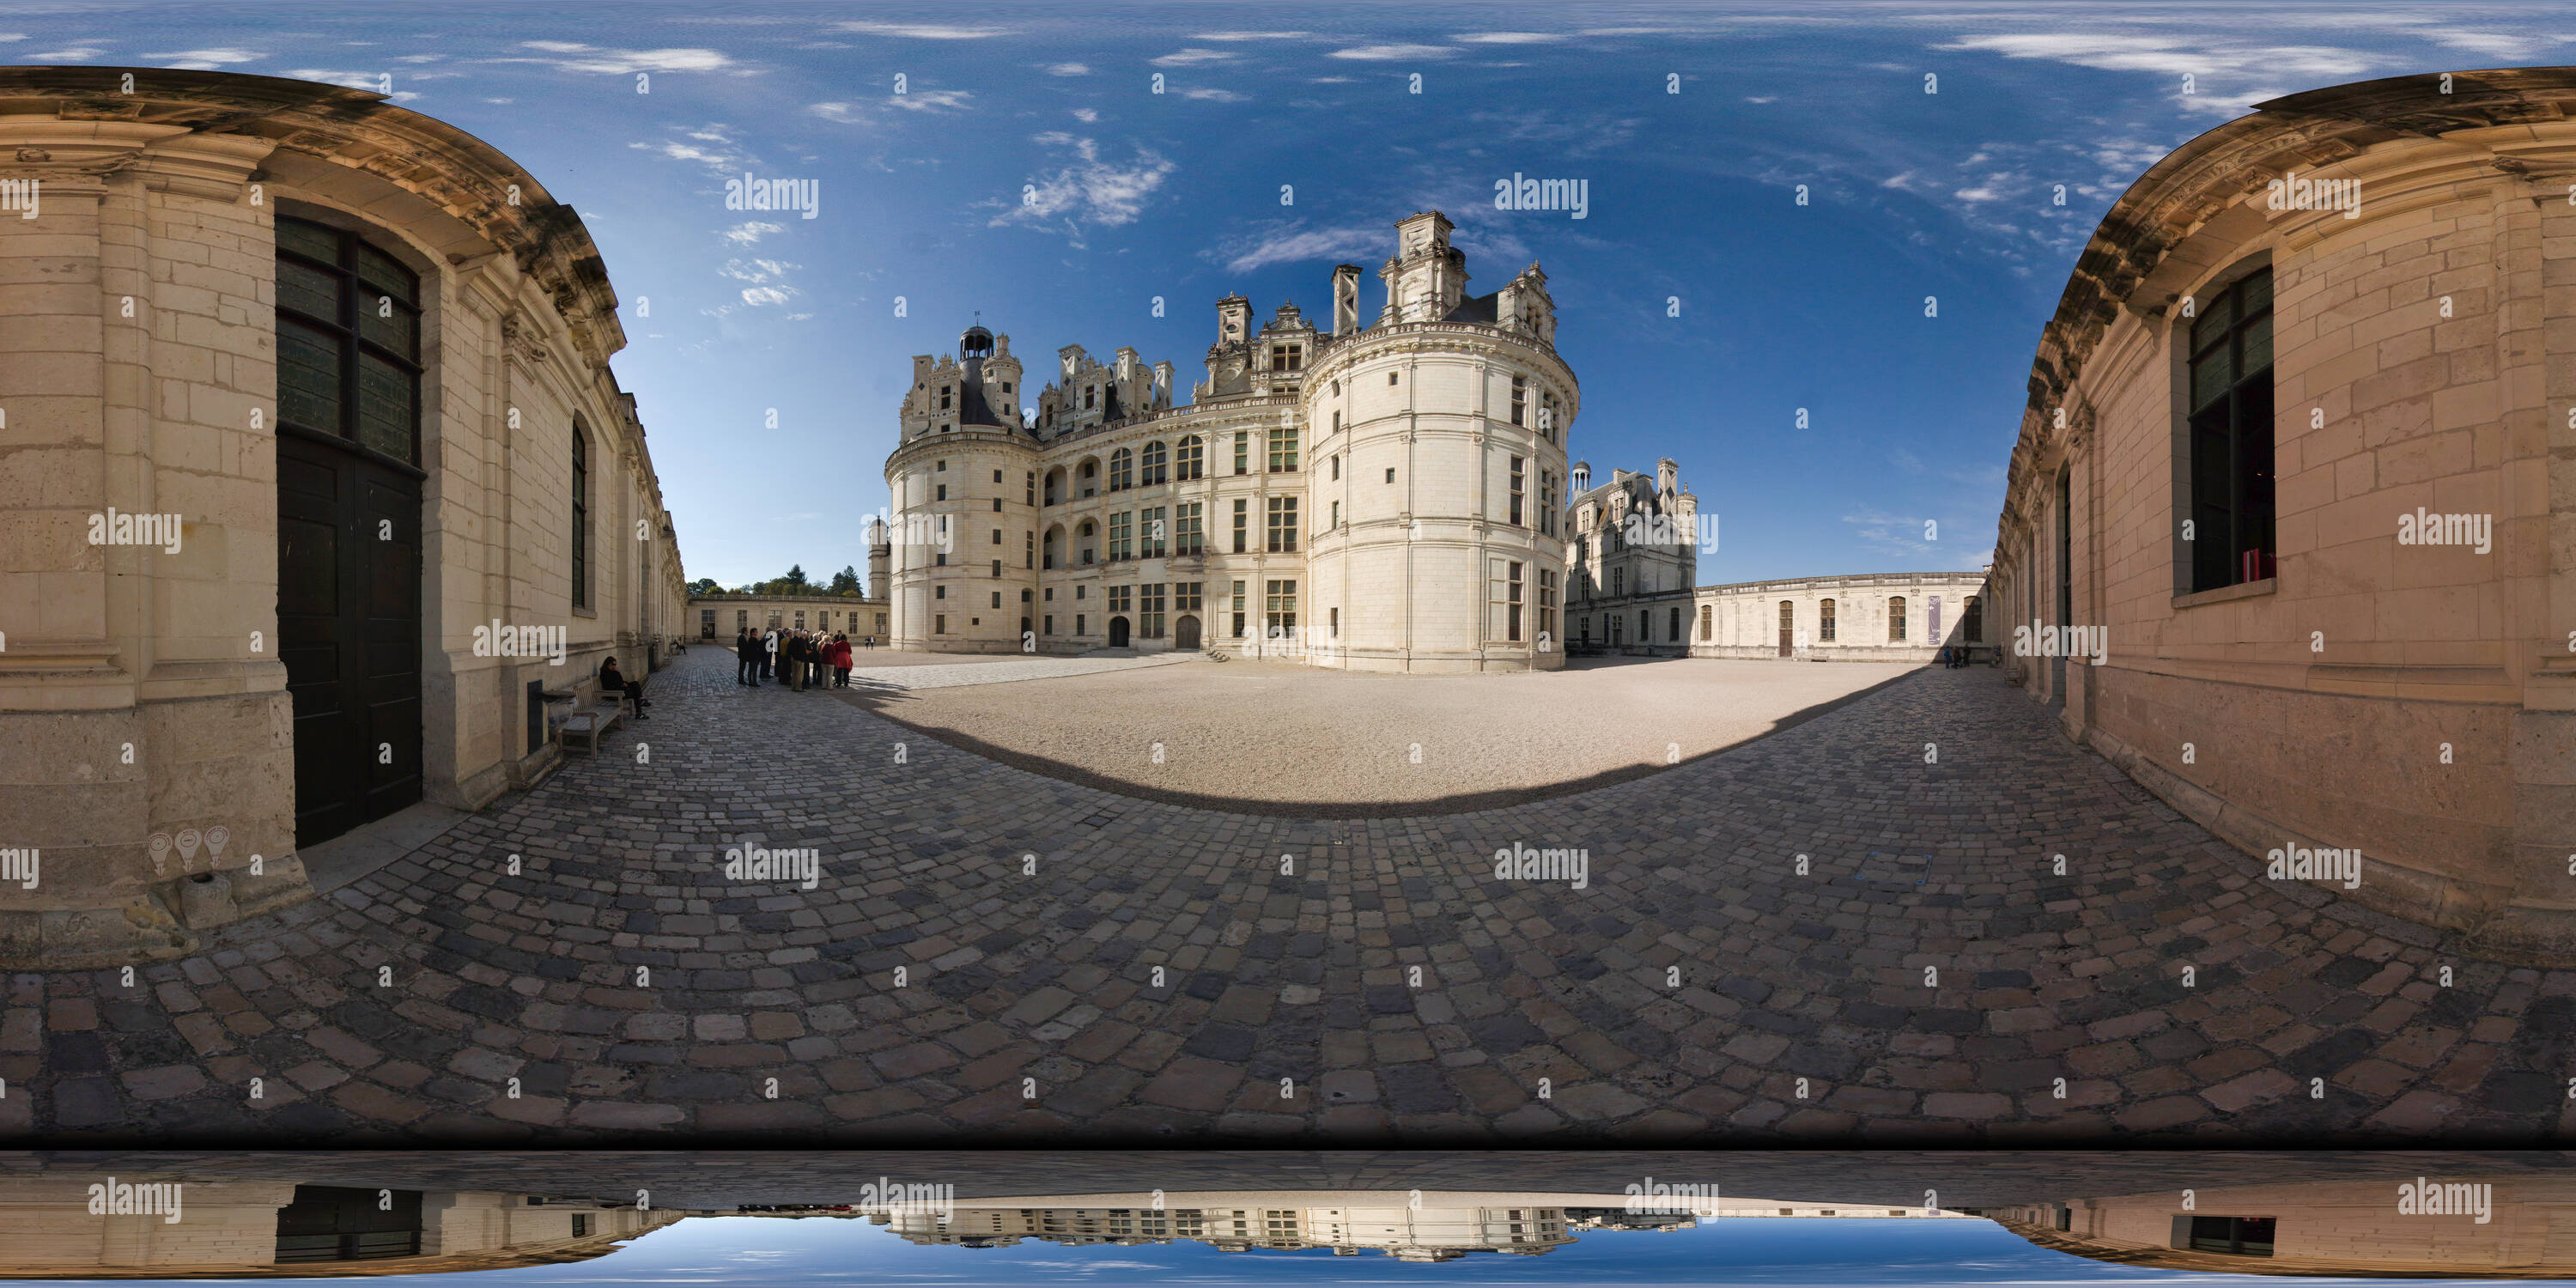 360 degree panoramic view of Château de Chambord, 2016-10, freehand